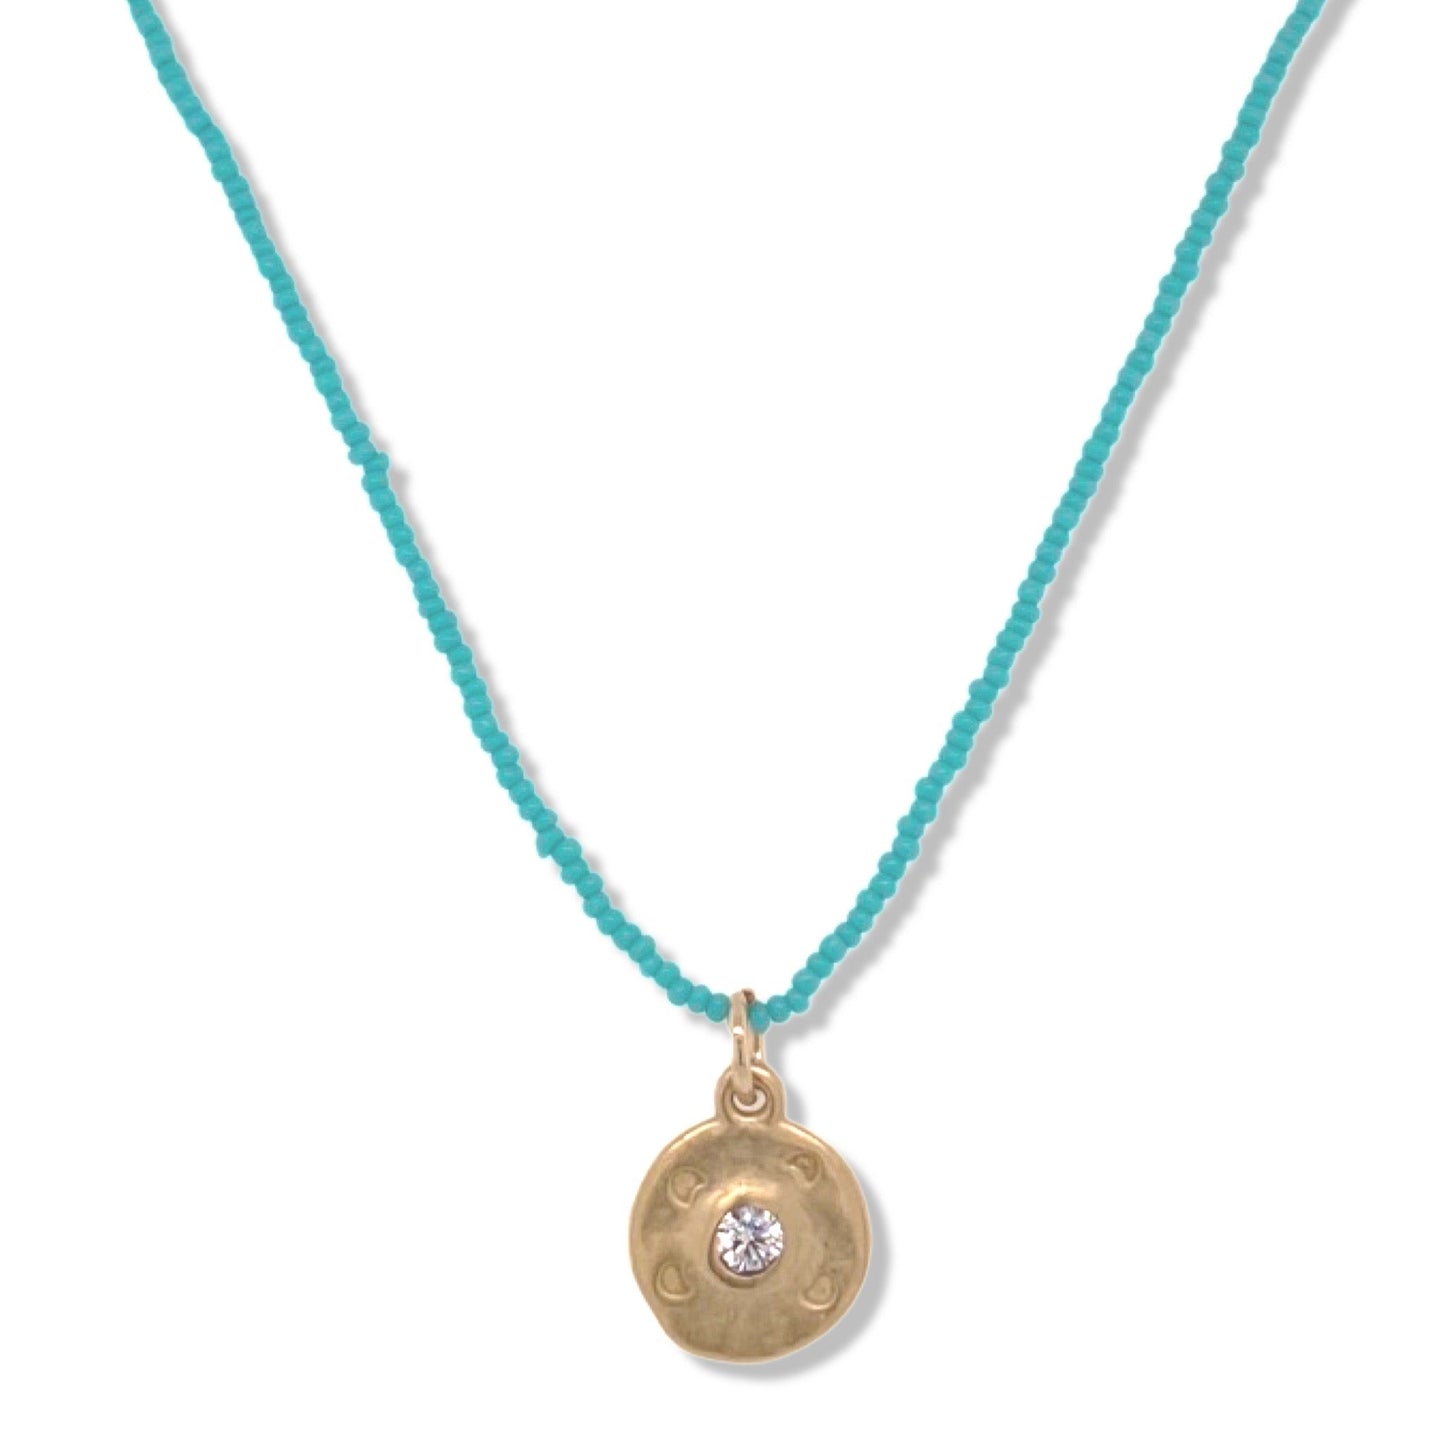 Mini Sparkle Necklace in Gold on Turquoise Beads | Nalu | Nantucket